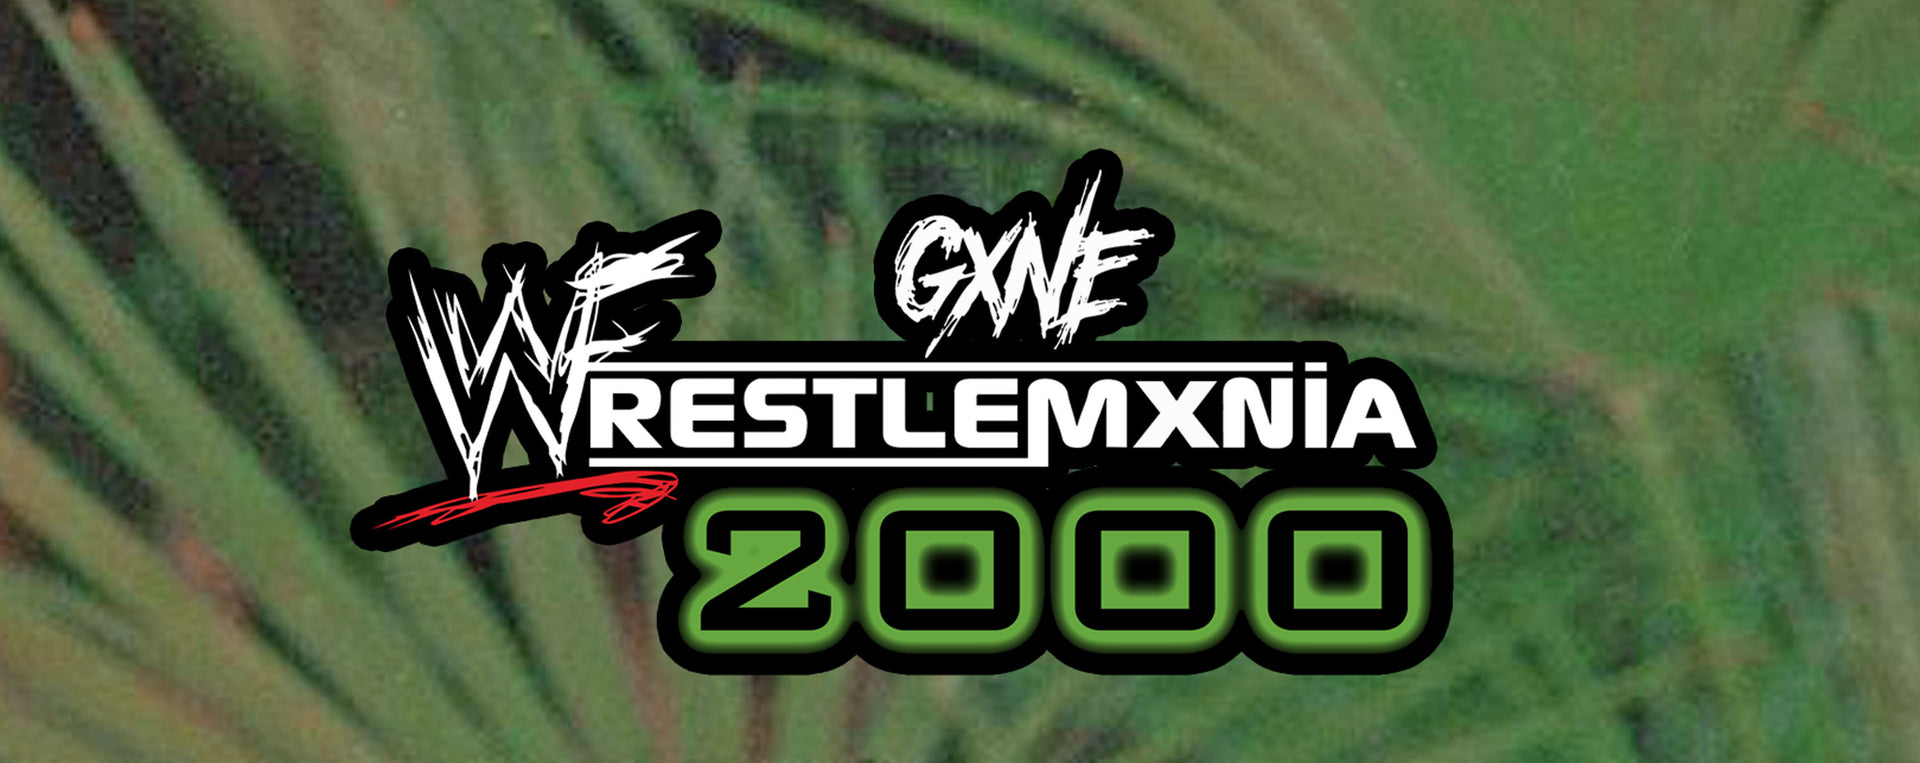 Load video: WRESTLEMXNIA 2000: The Animated Series